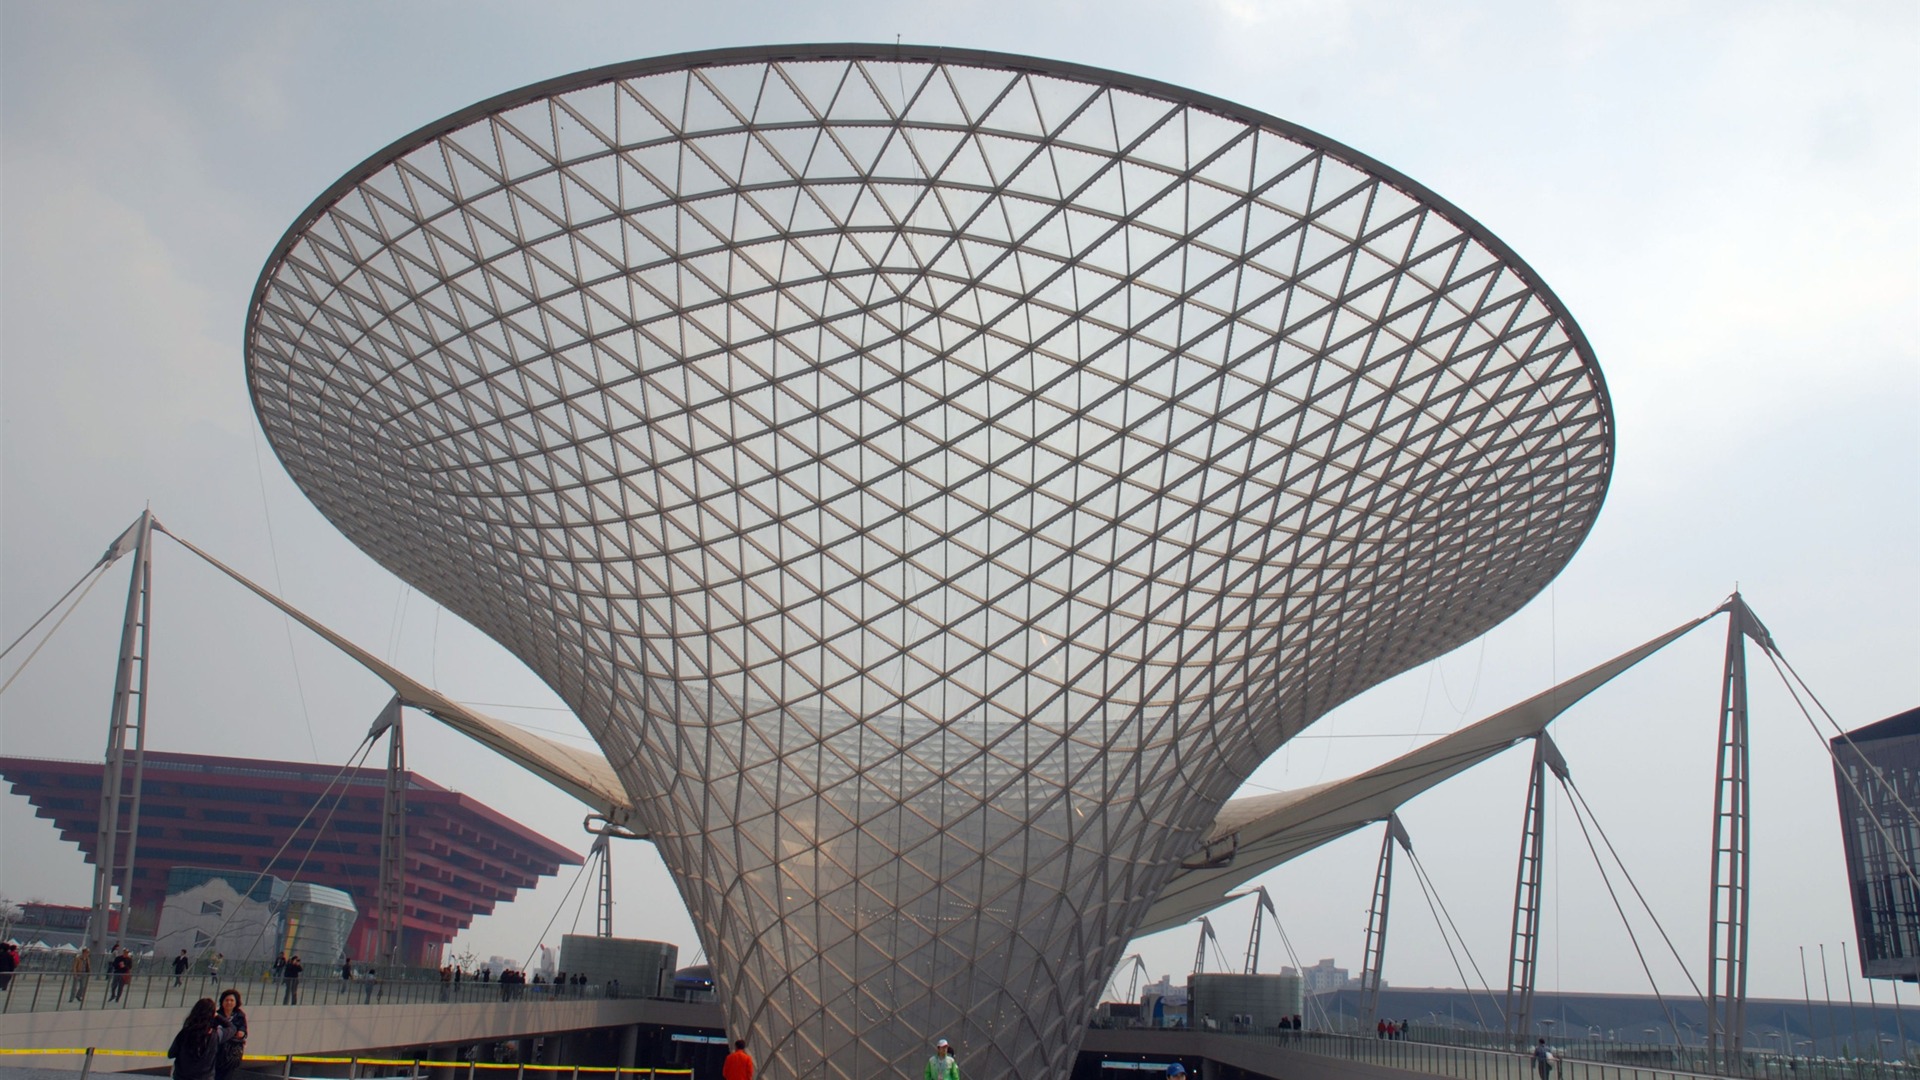 Commissioning of the 2010 Shanghai World Expo (studious works) #19 - 1920x1080